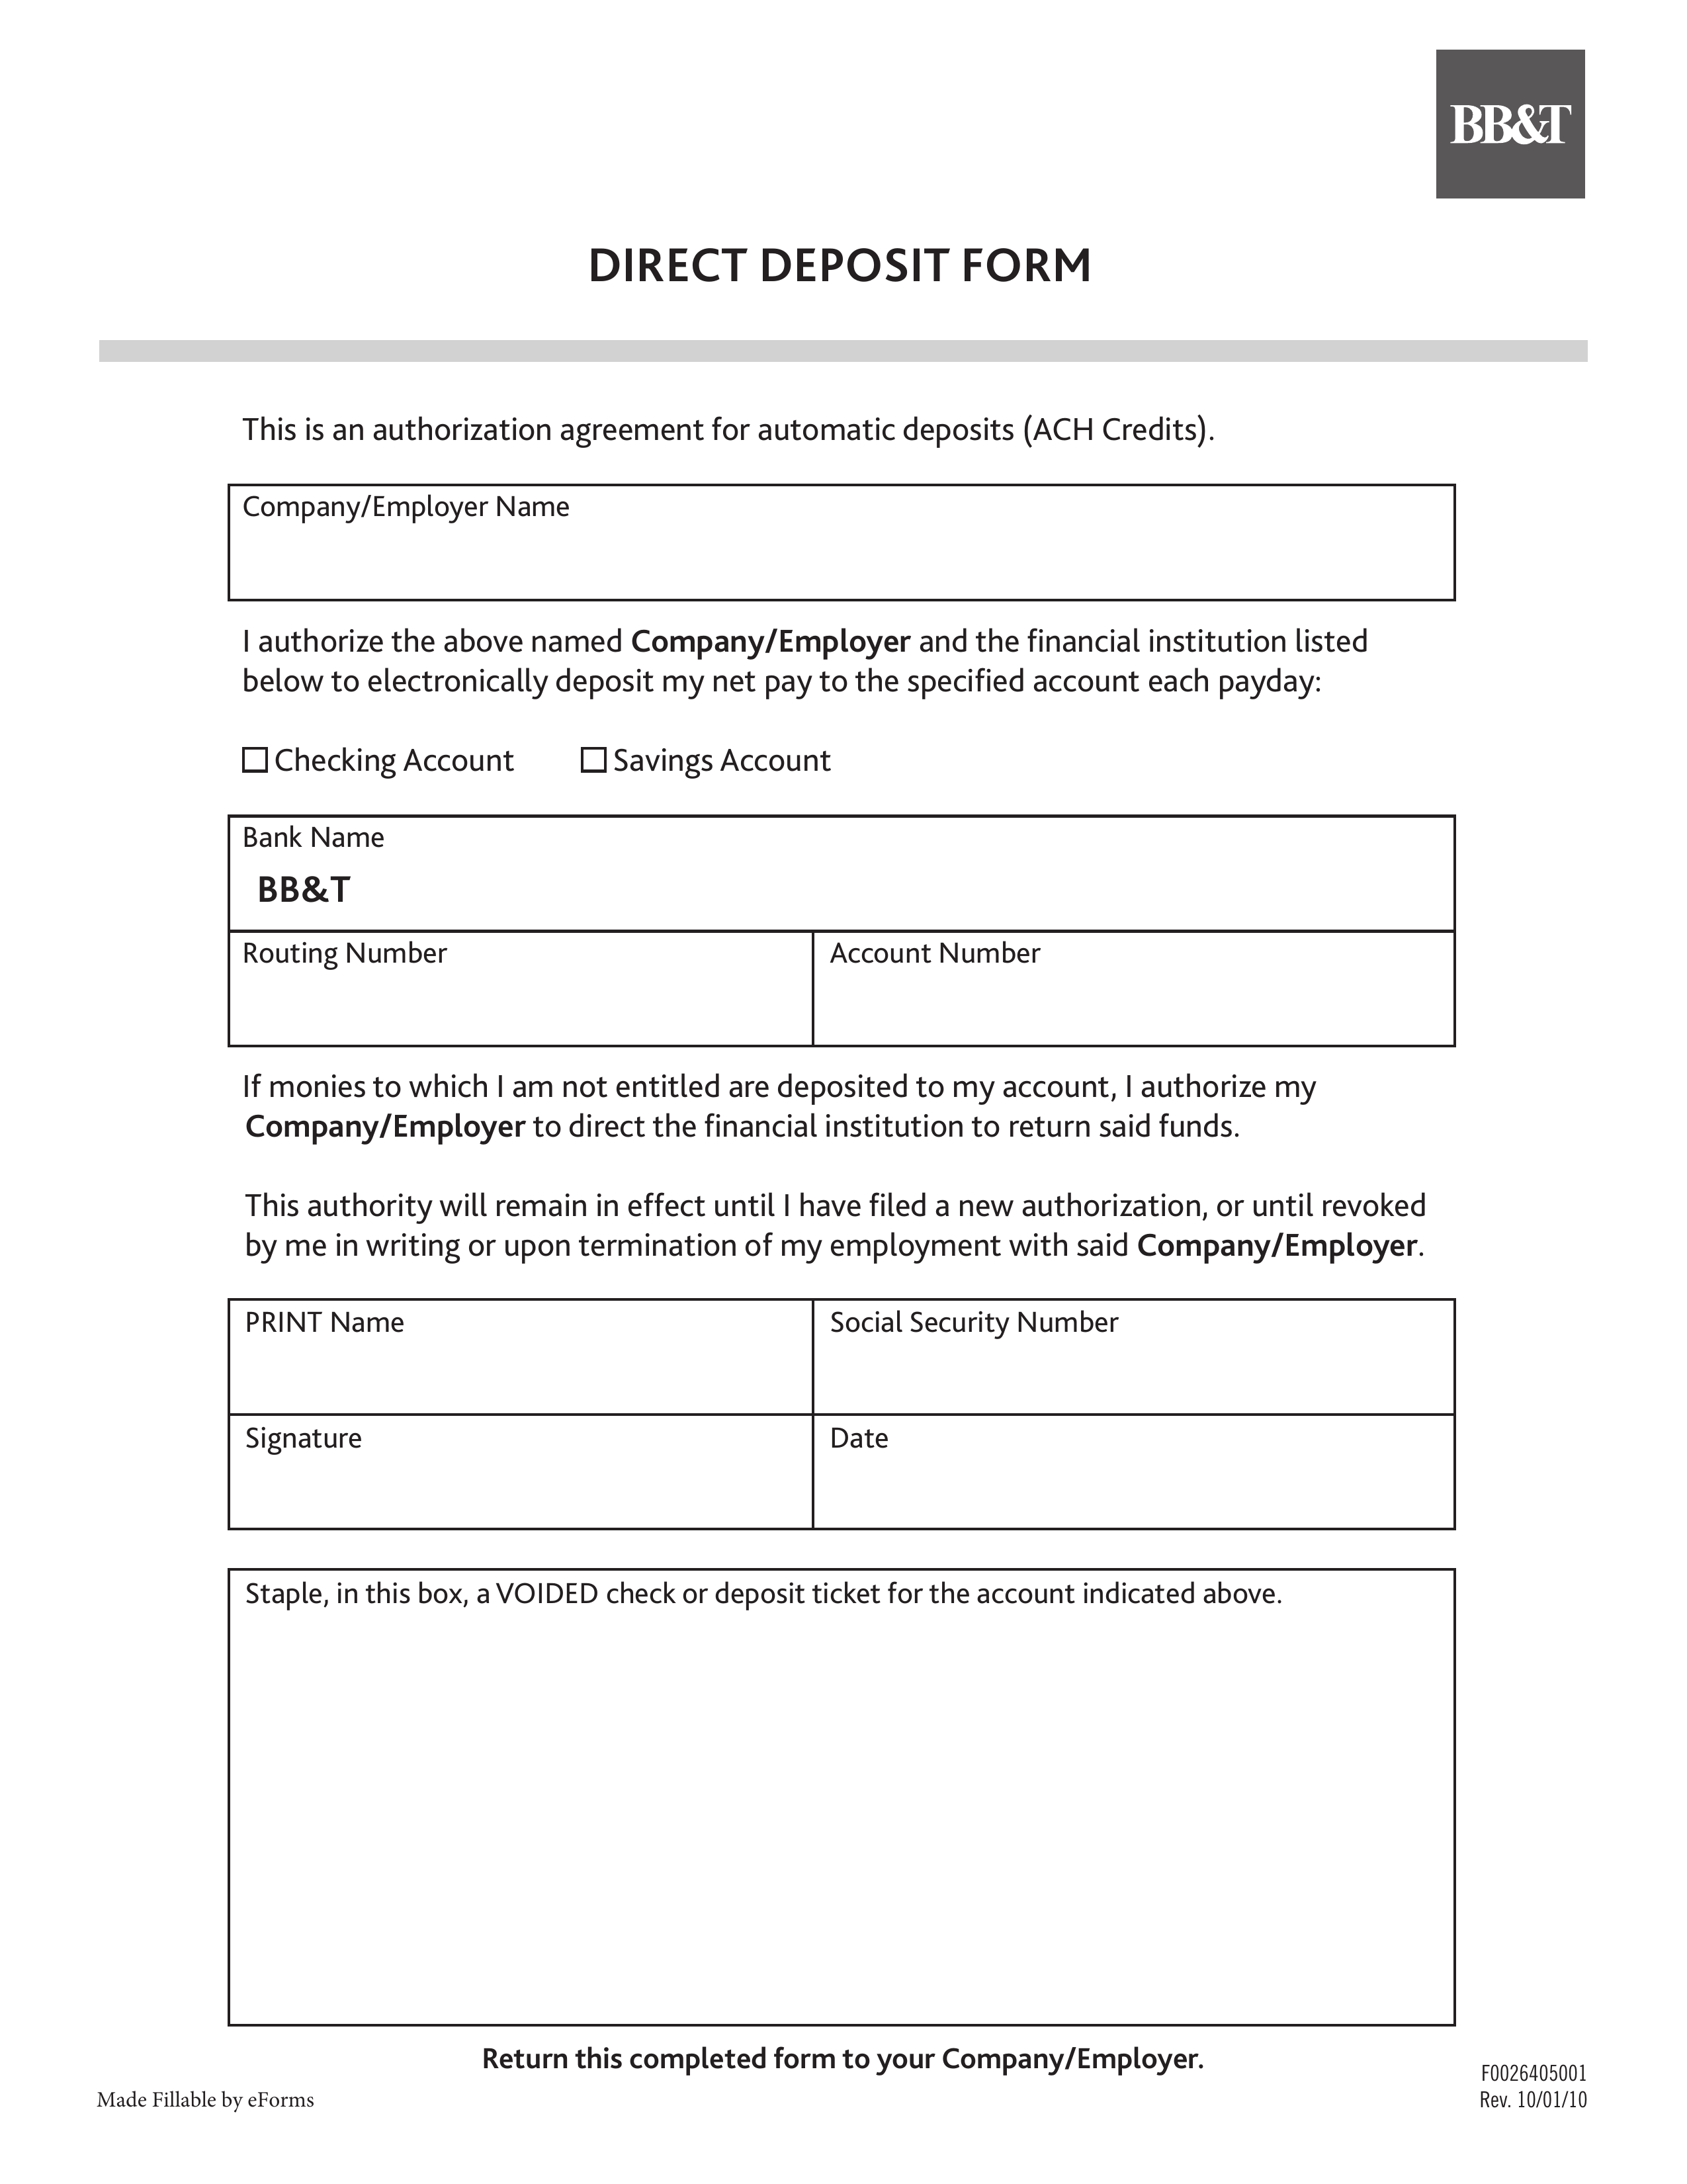 Free BB&T Direct Deposit Authorization Form - PDF – eForms Inside Authorization Agreement For Direct Deposit Inside Authorization Agreement For Direct Deposit